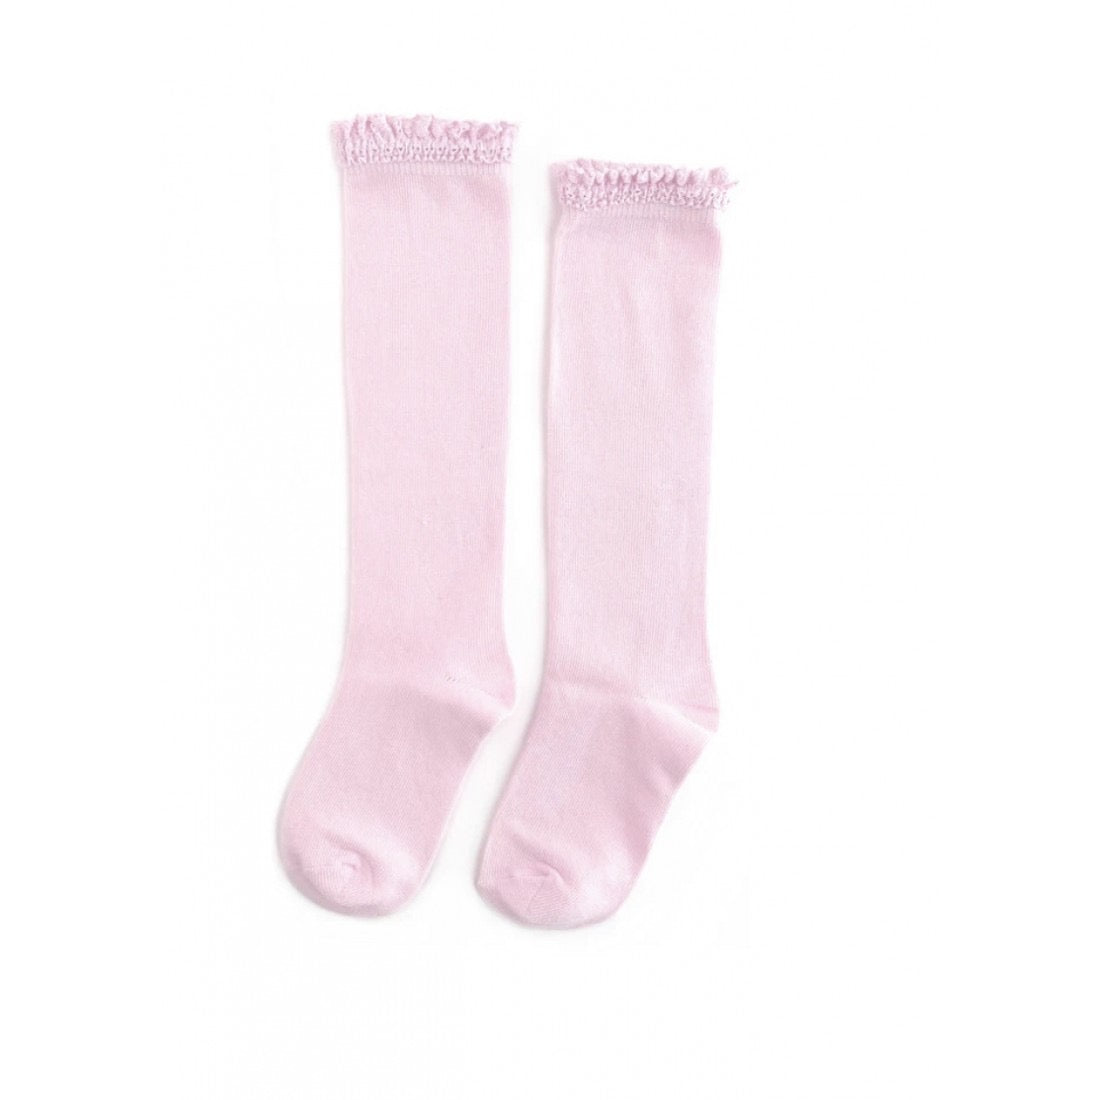 Knee High Socks Cotton Lace Top Cotton Candy